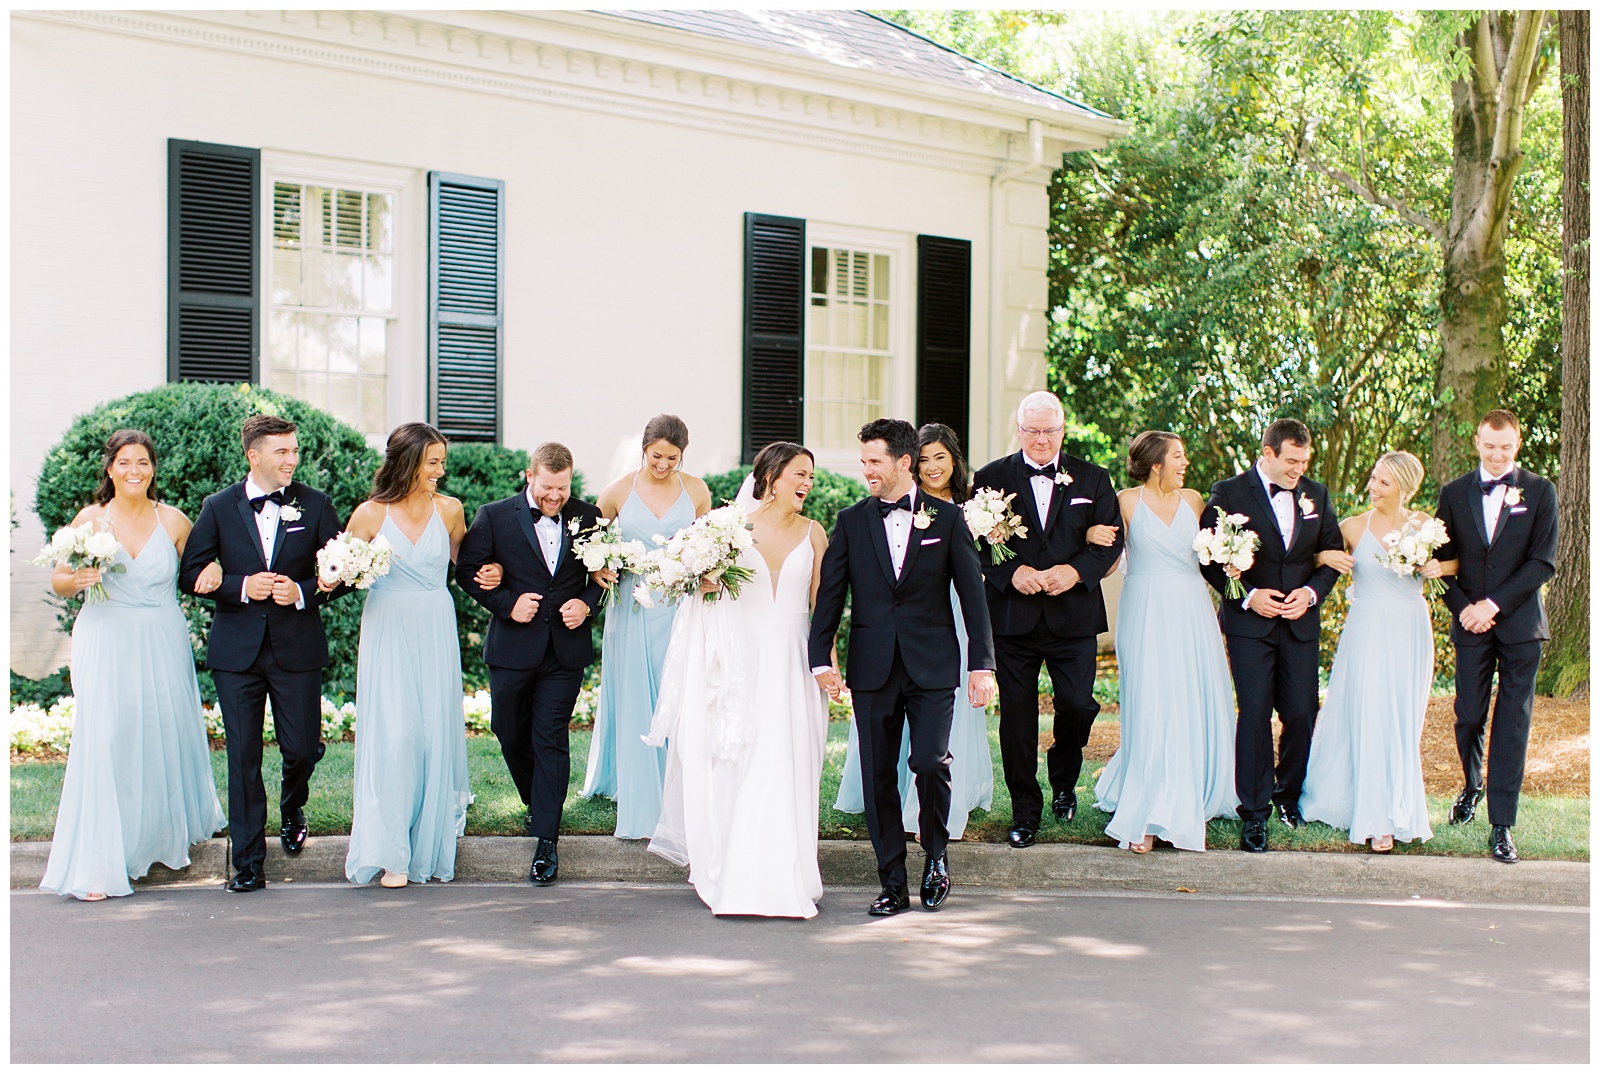 newlyweds walk with wedding party in blue gowns and black tuxes 